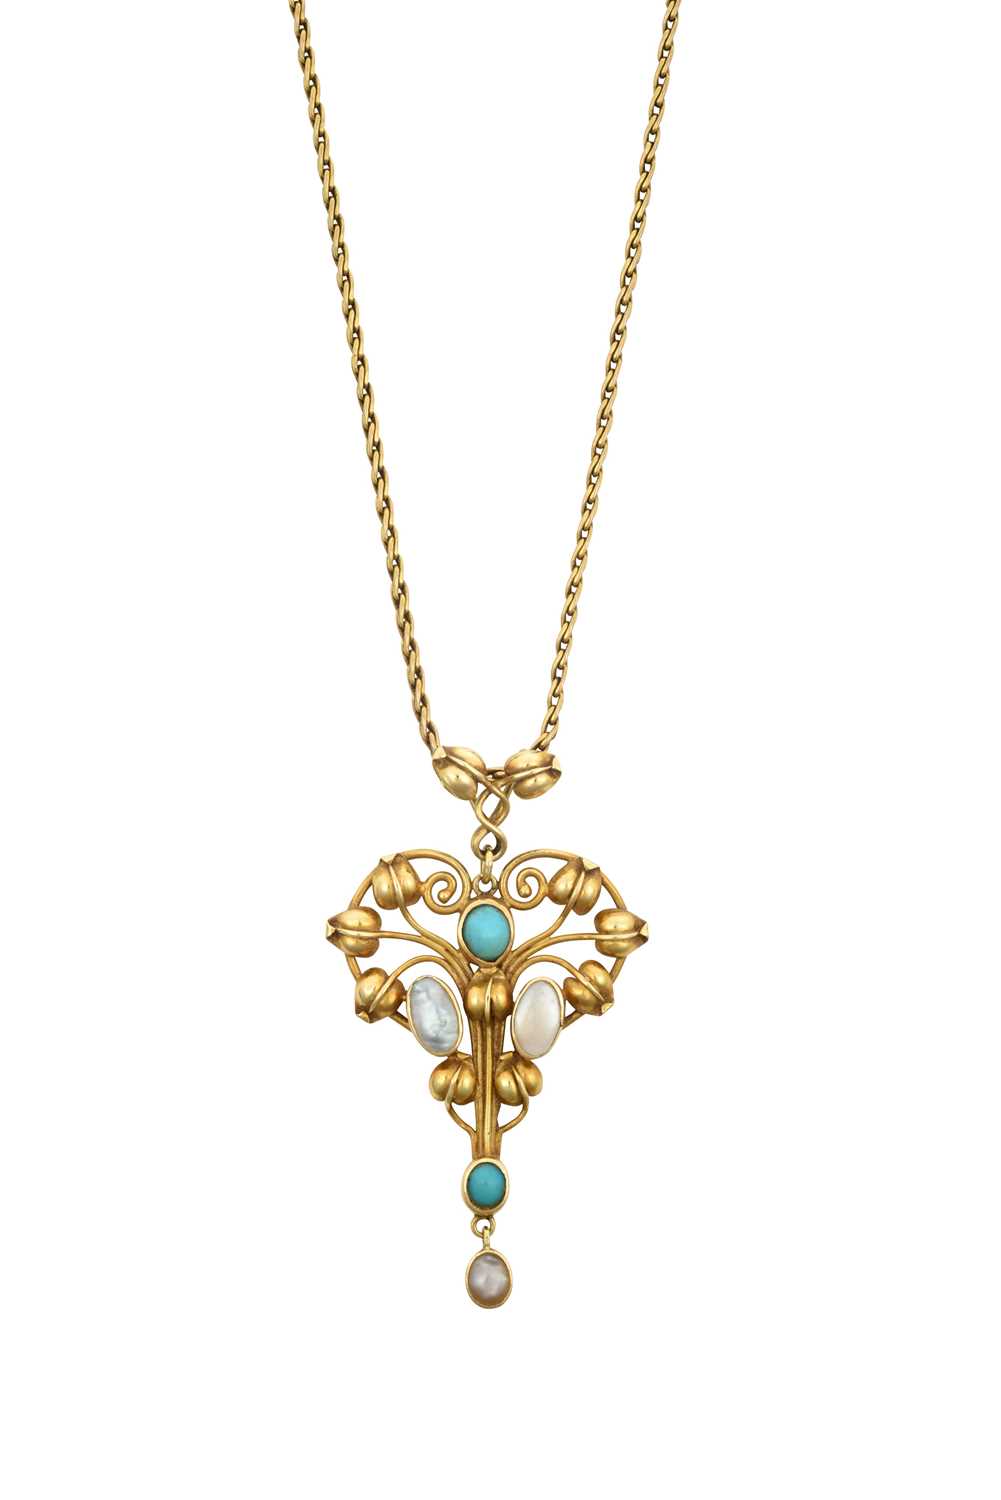 A Turquoise and Mother-of-Pearl Pendant on Chain the openwork scroll and foliate motif frame